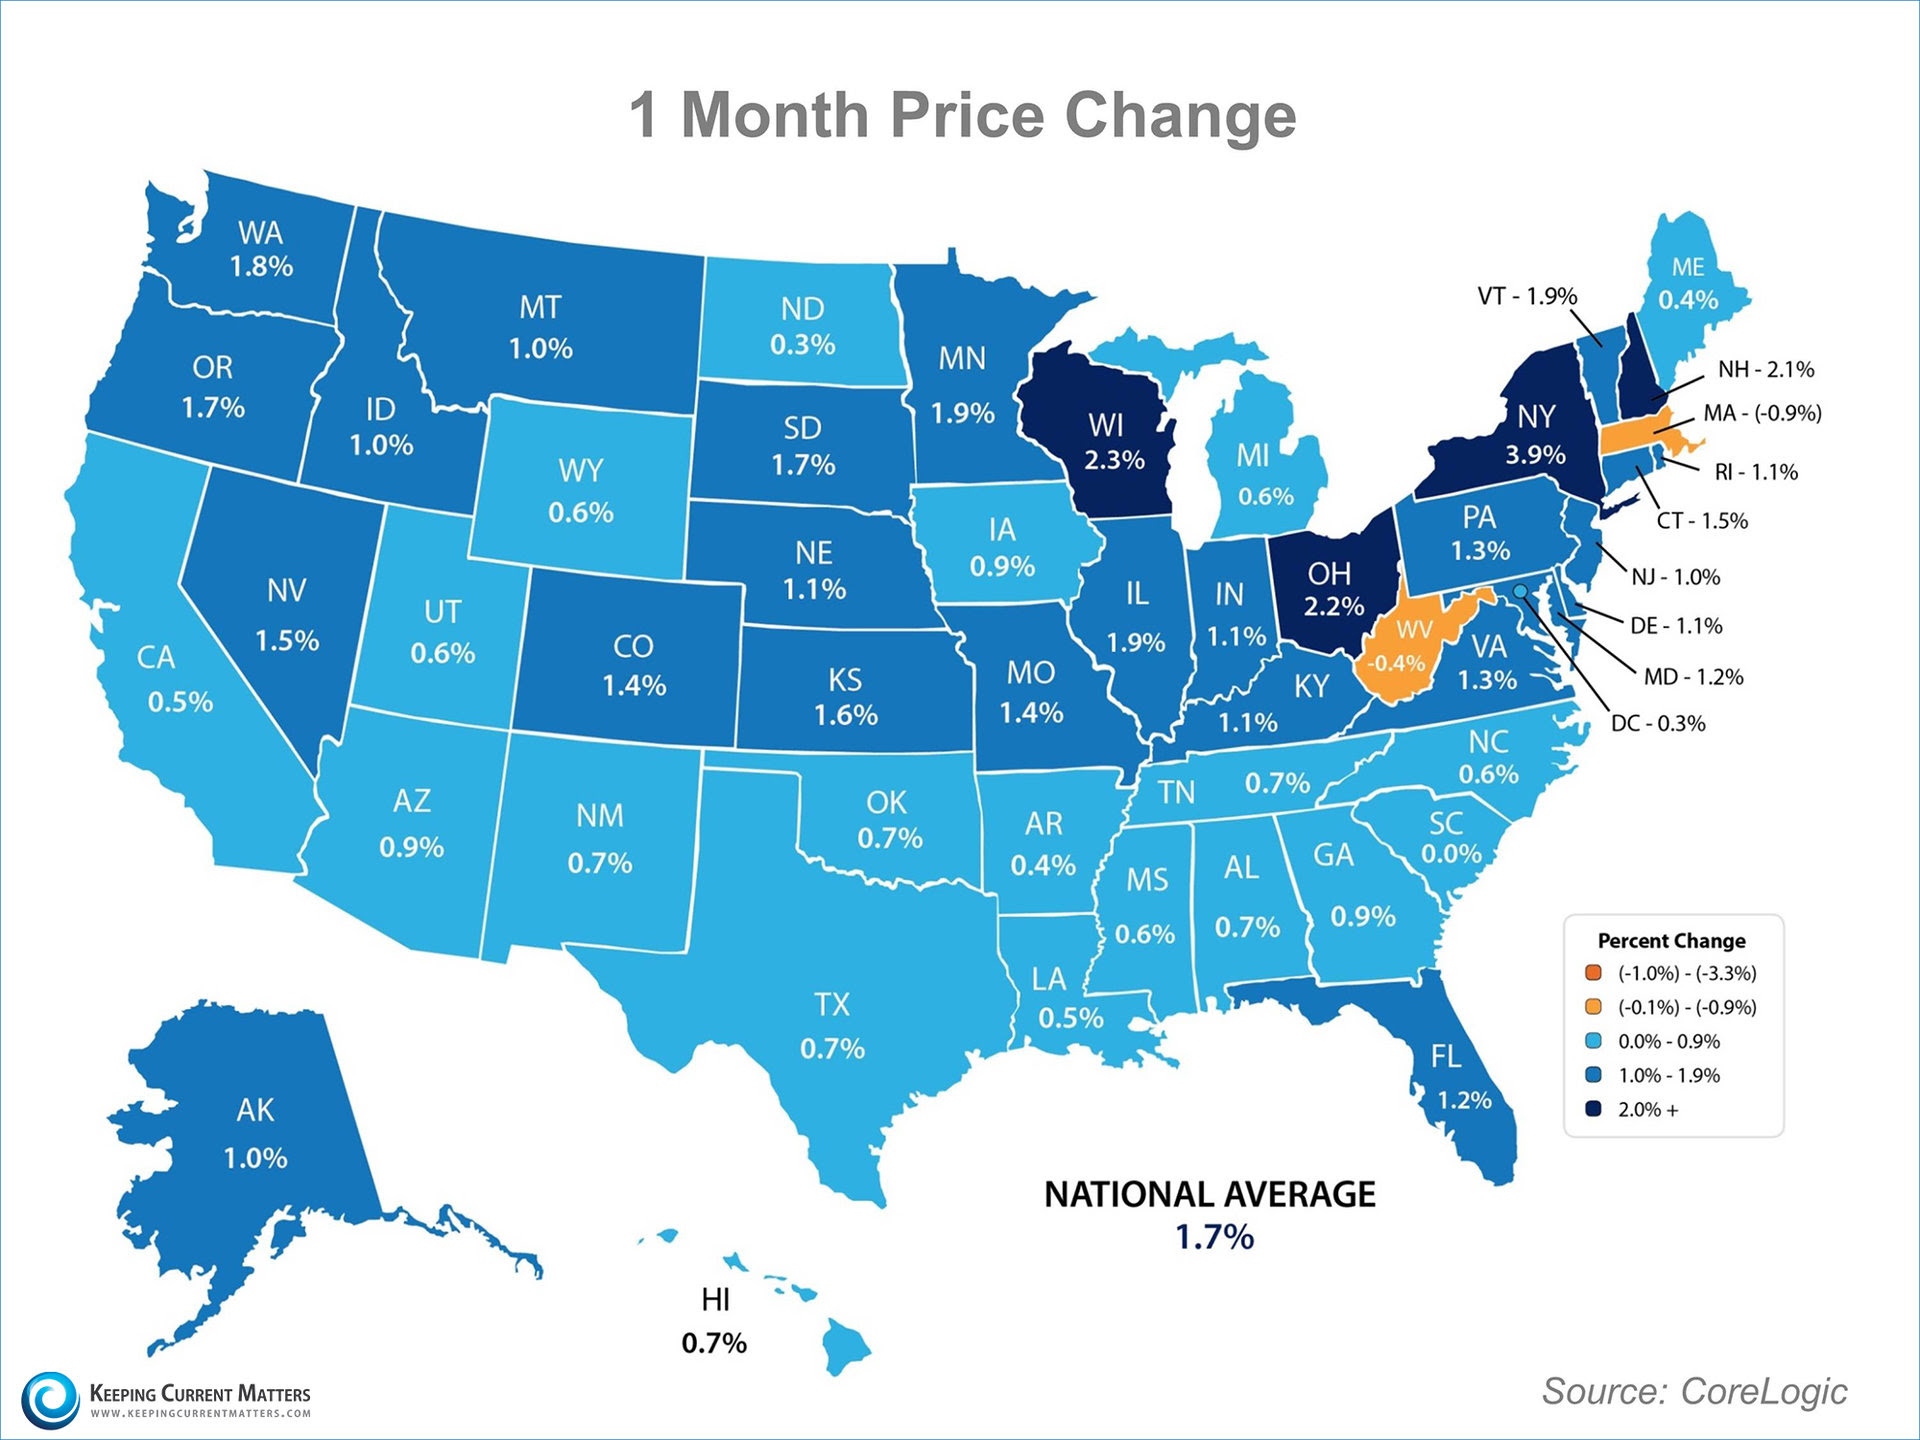 One Month Price Change | Keeping Current Matters